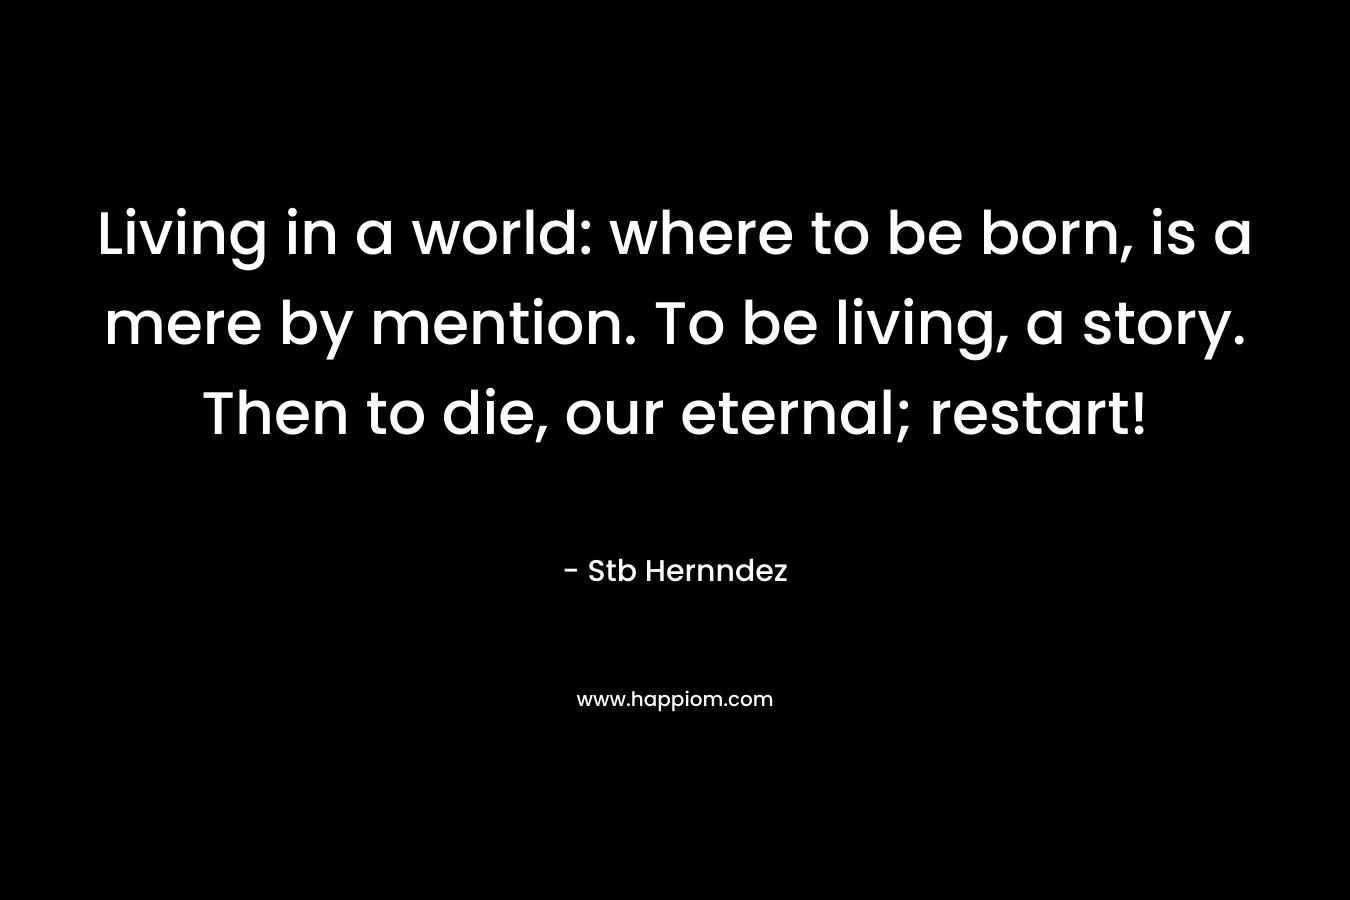 Living in a world: where to be born, is a mere by mention. To be living, a story. Then to die, our eternal; restart! – Stb Hernndez